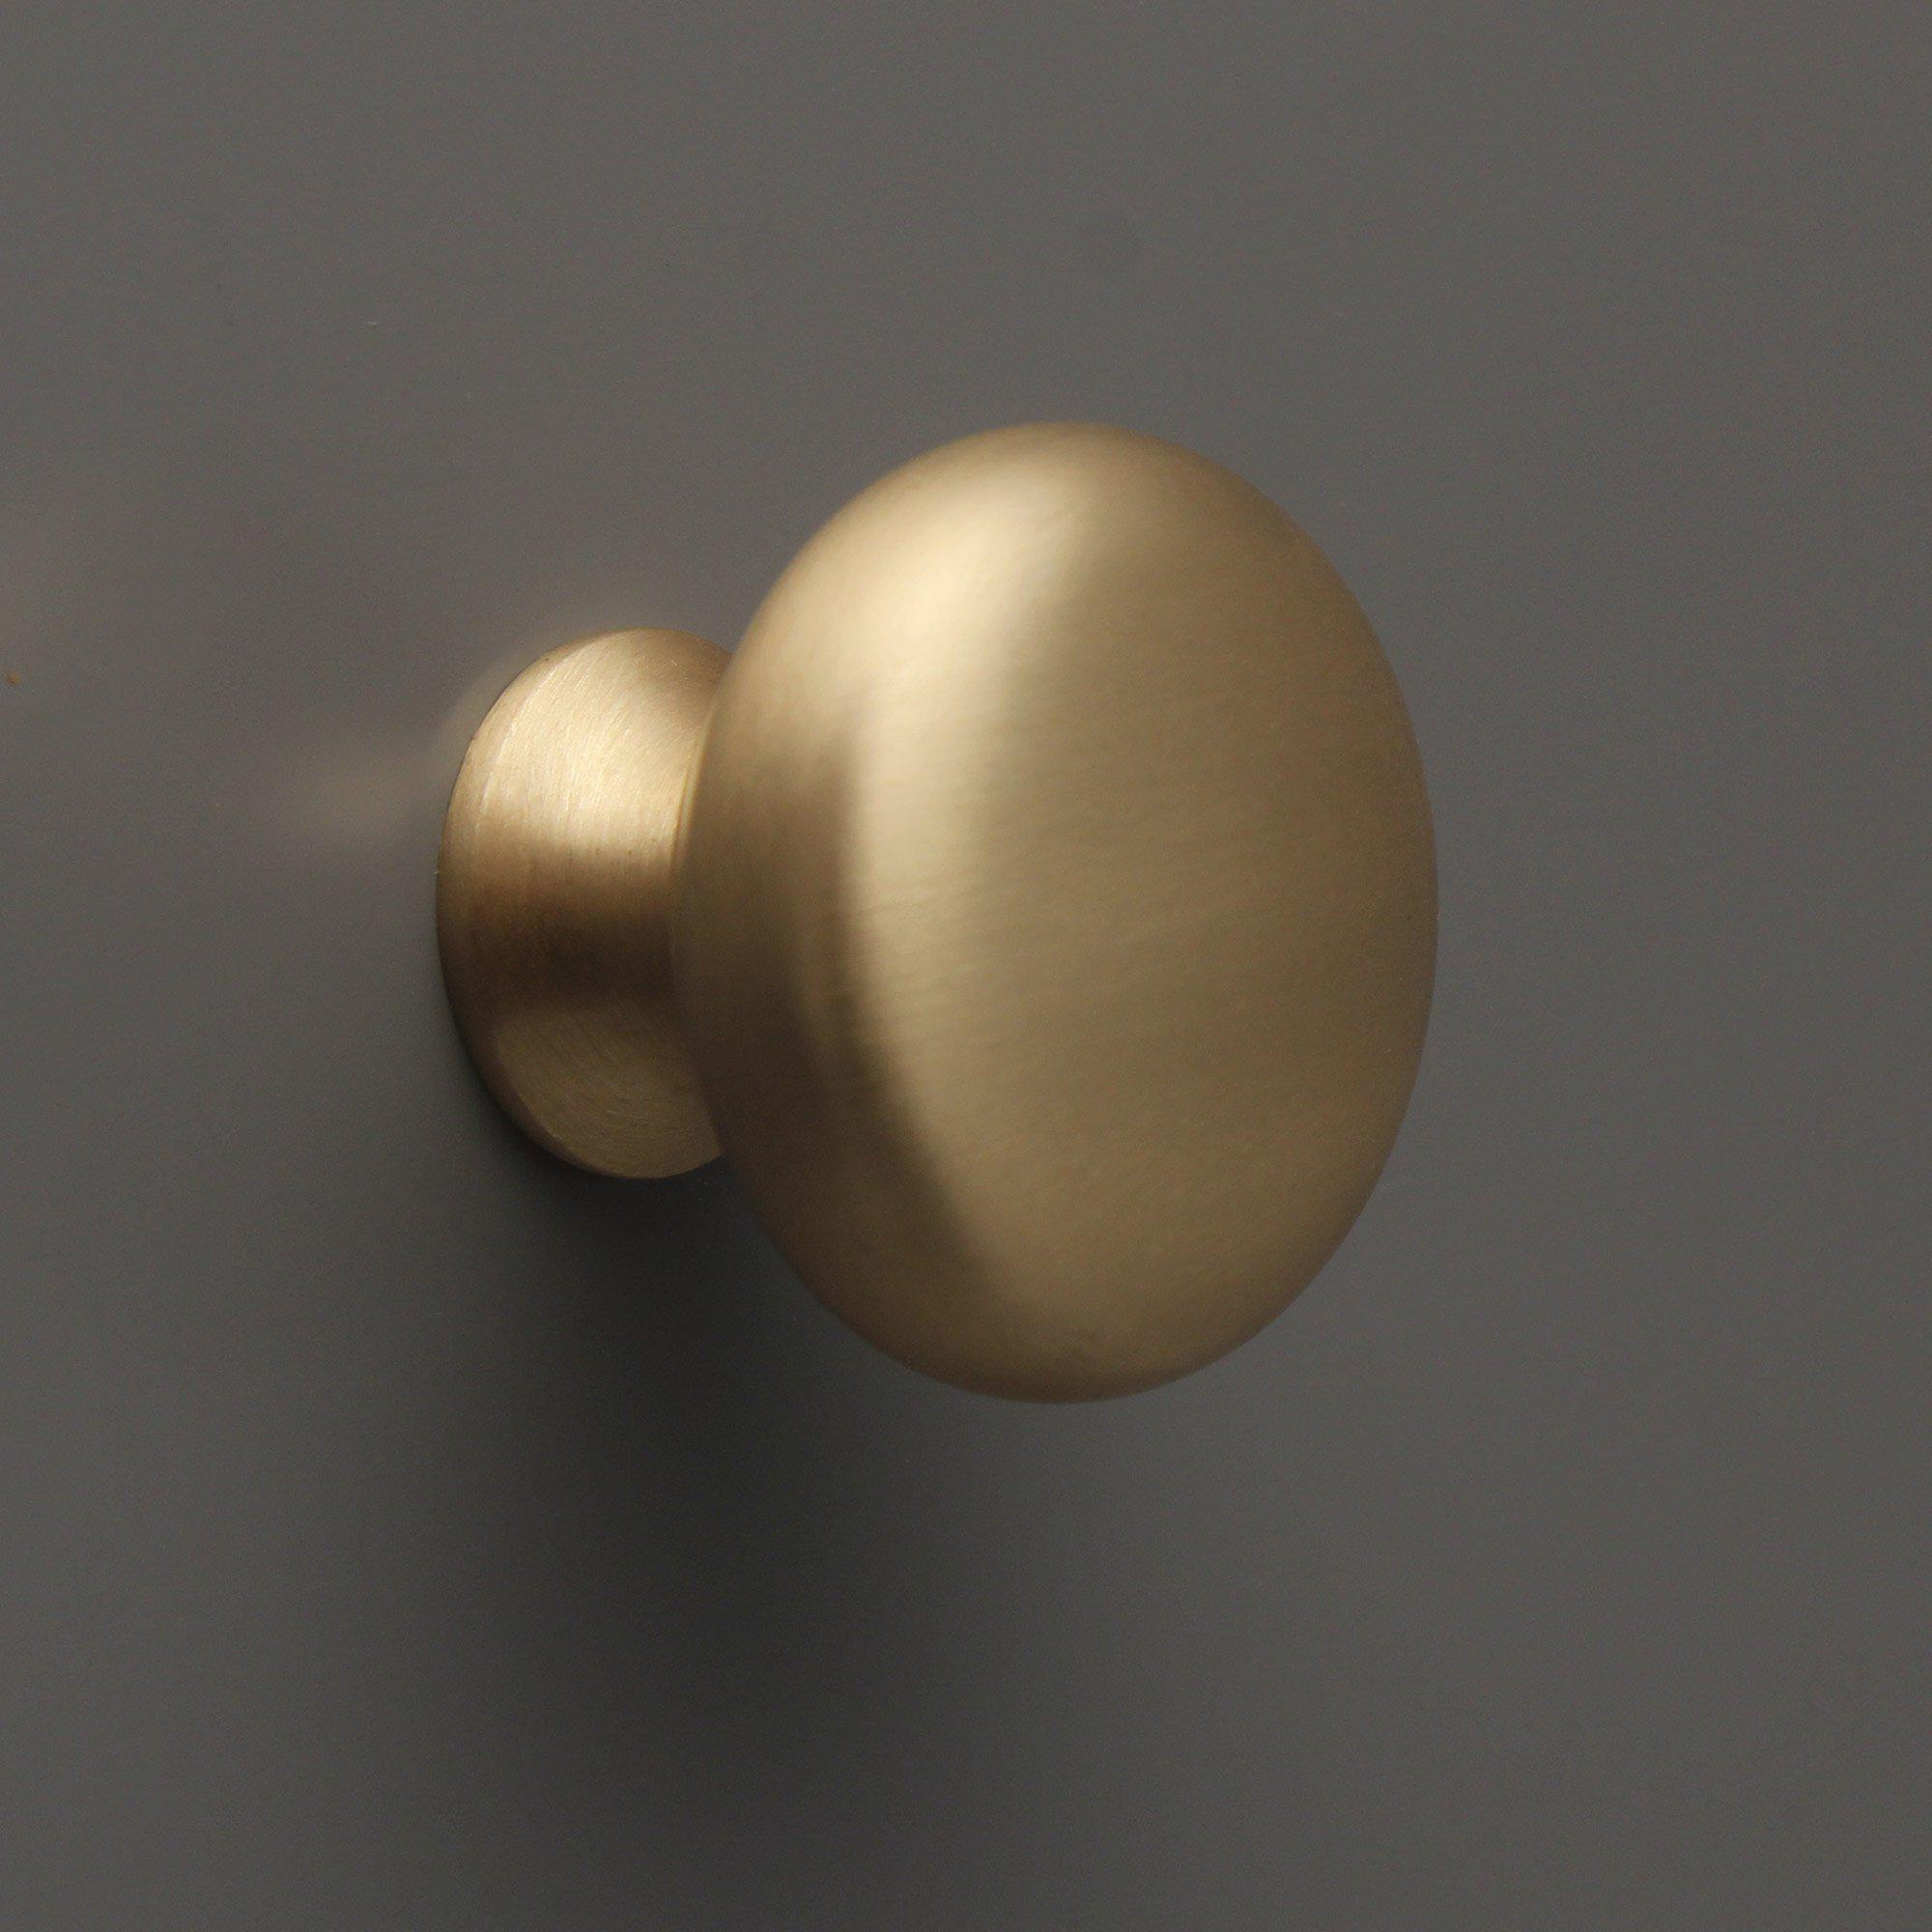 Classic Brushed Satin Brass Cupboard Handles, Unlacquered